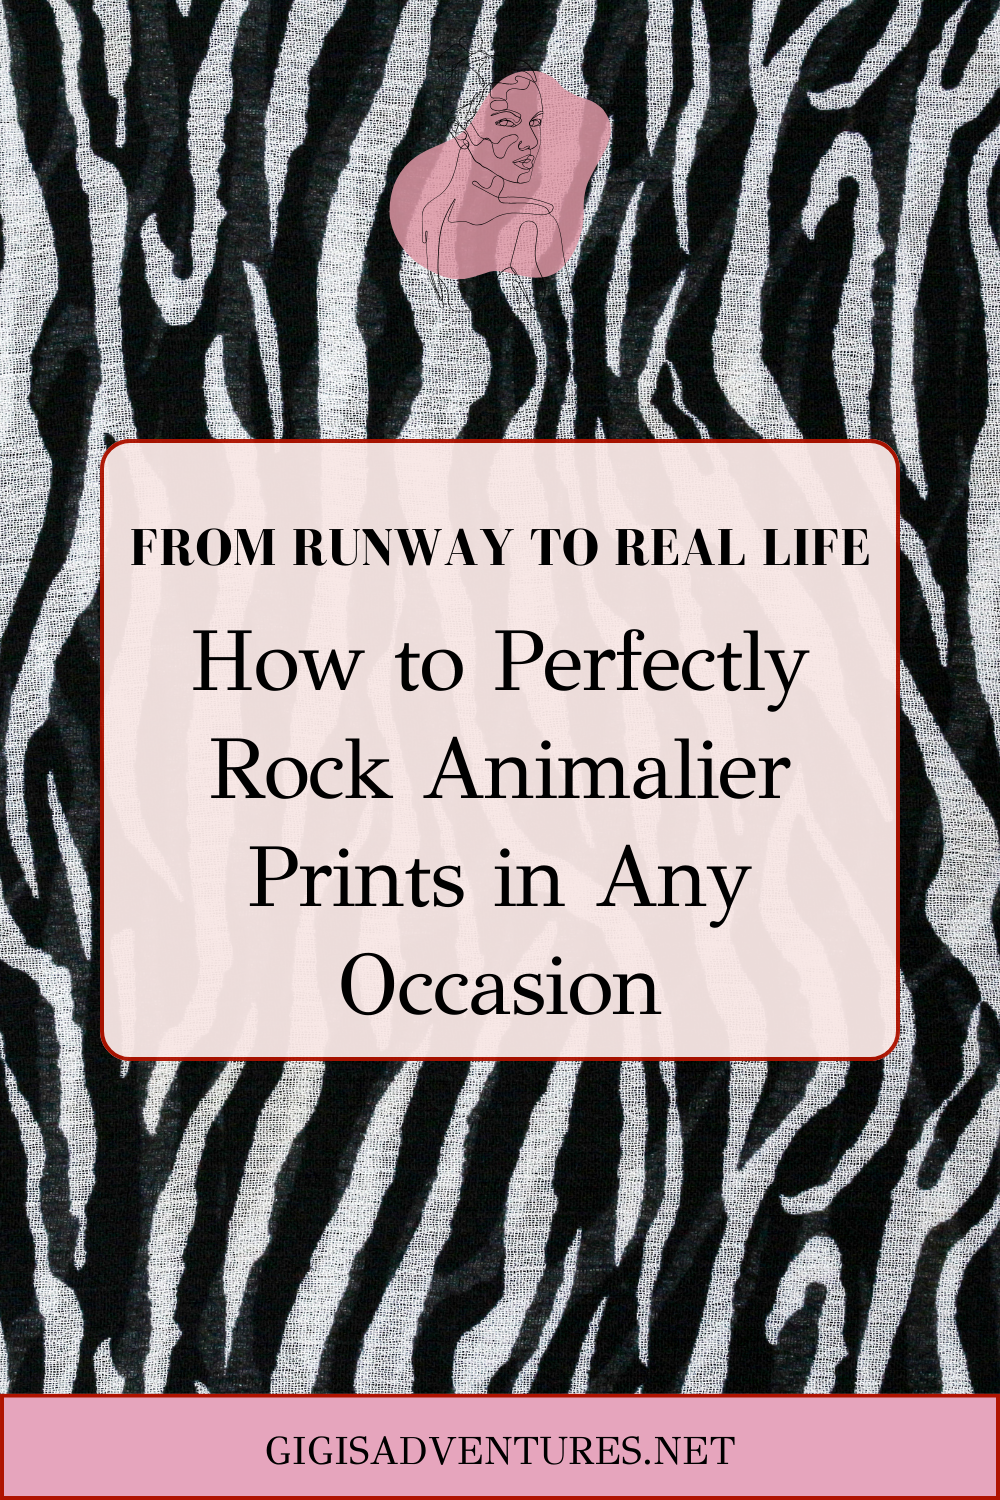 From Runway to Real Life: How to Perfectly Rock Animalier Prints in Any Occasion